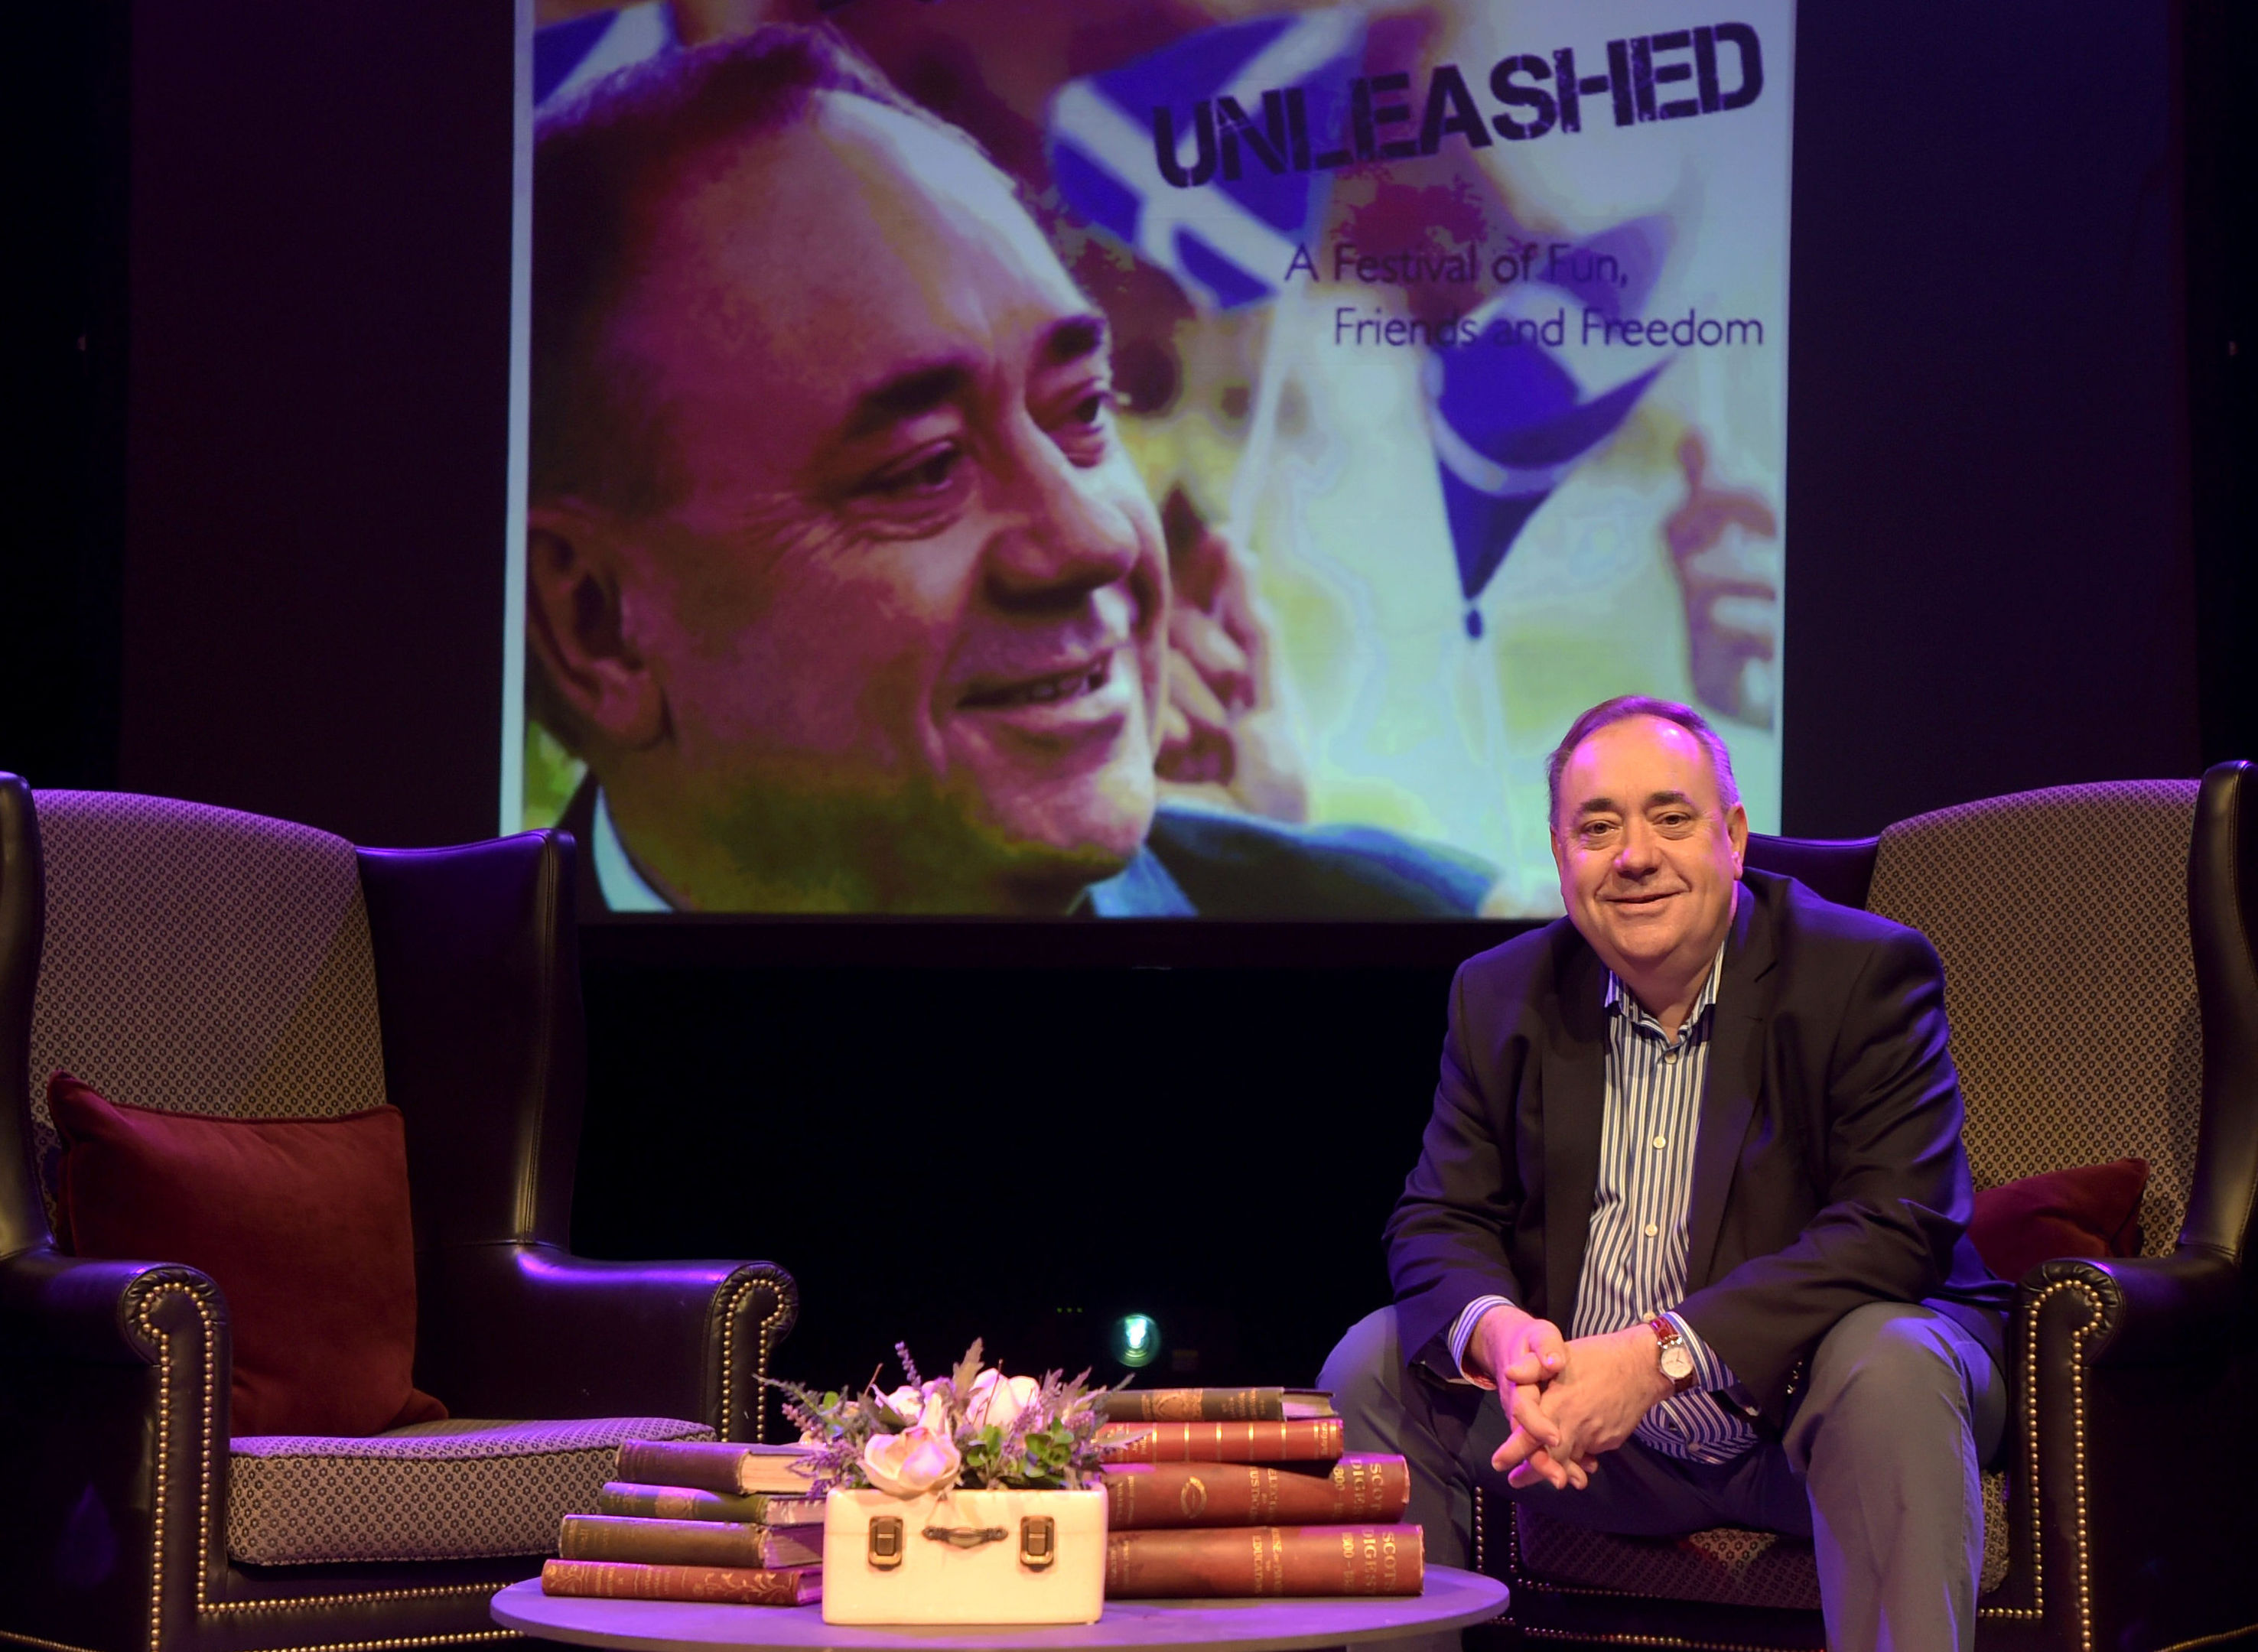 Former First Minister Alex Salmond during a photocall on stage at the Assembly Rooms in Edinburgh ahead of his 2017 Festival Fringe show Alex Salmond Unleashed. (Lesley Martin/PA Wire)